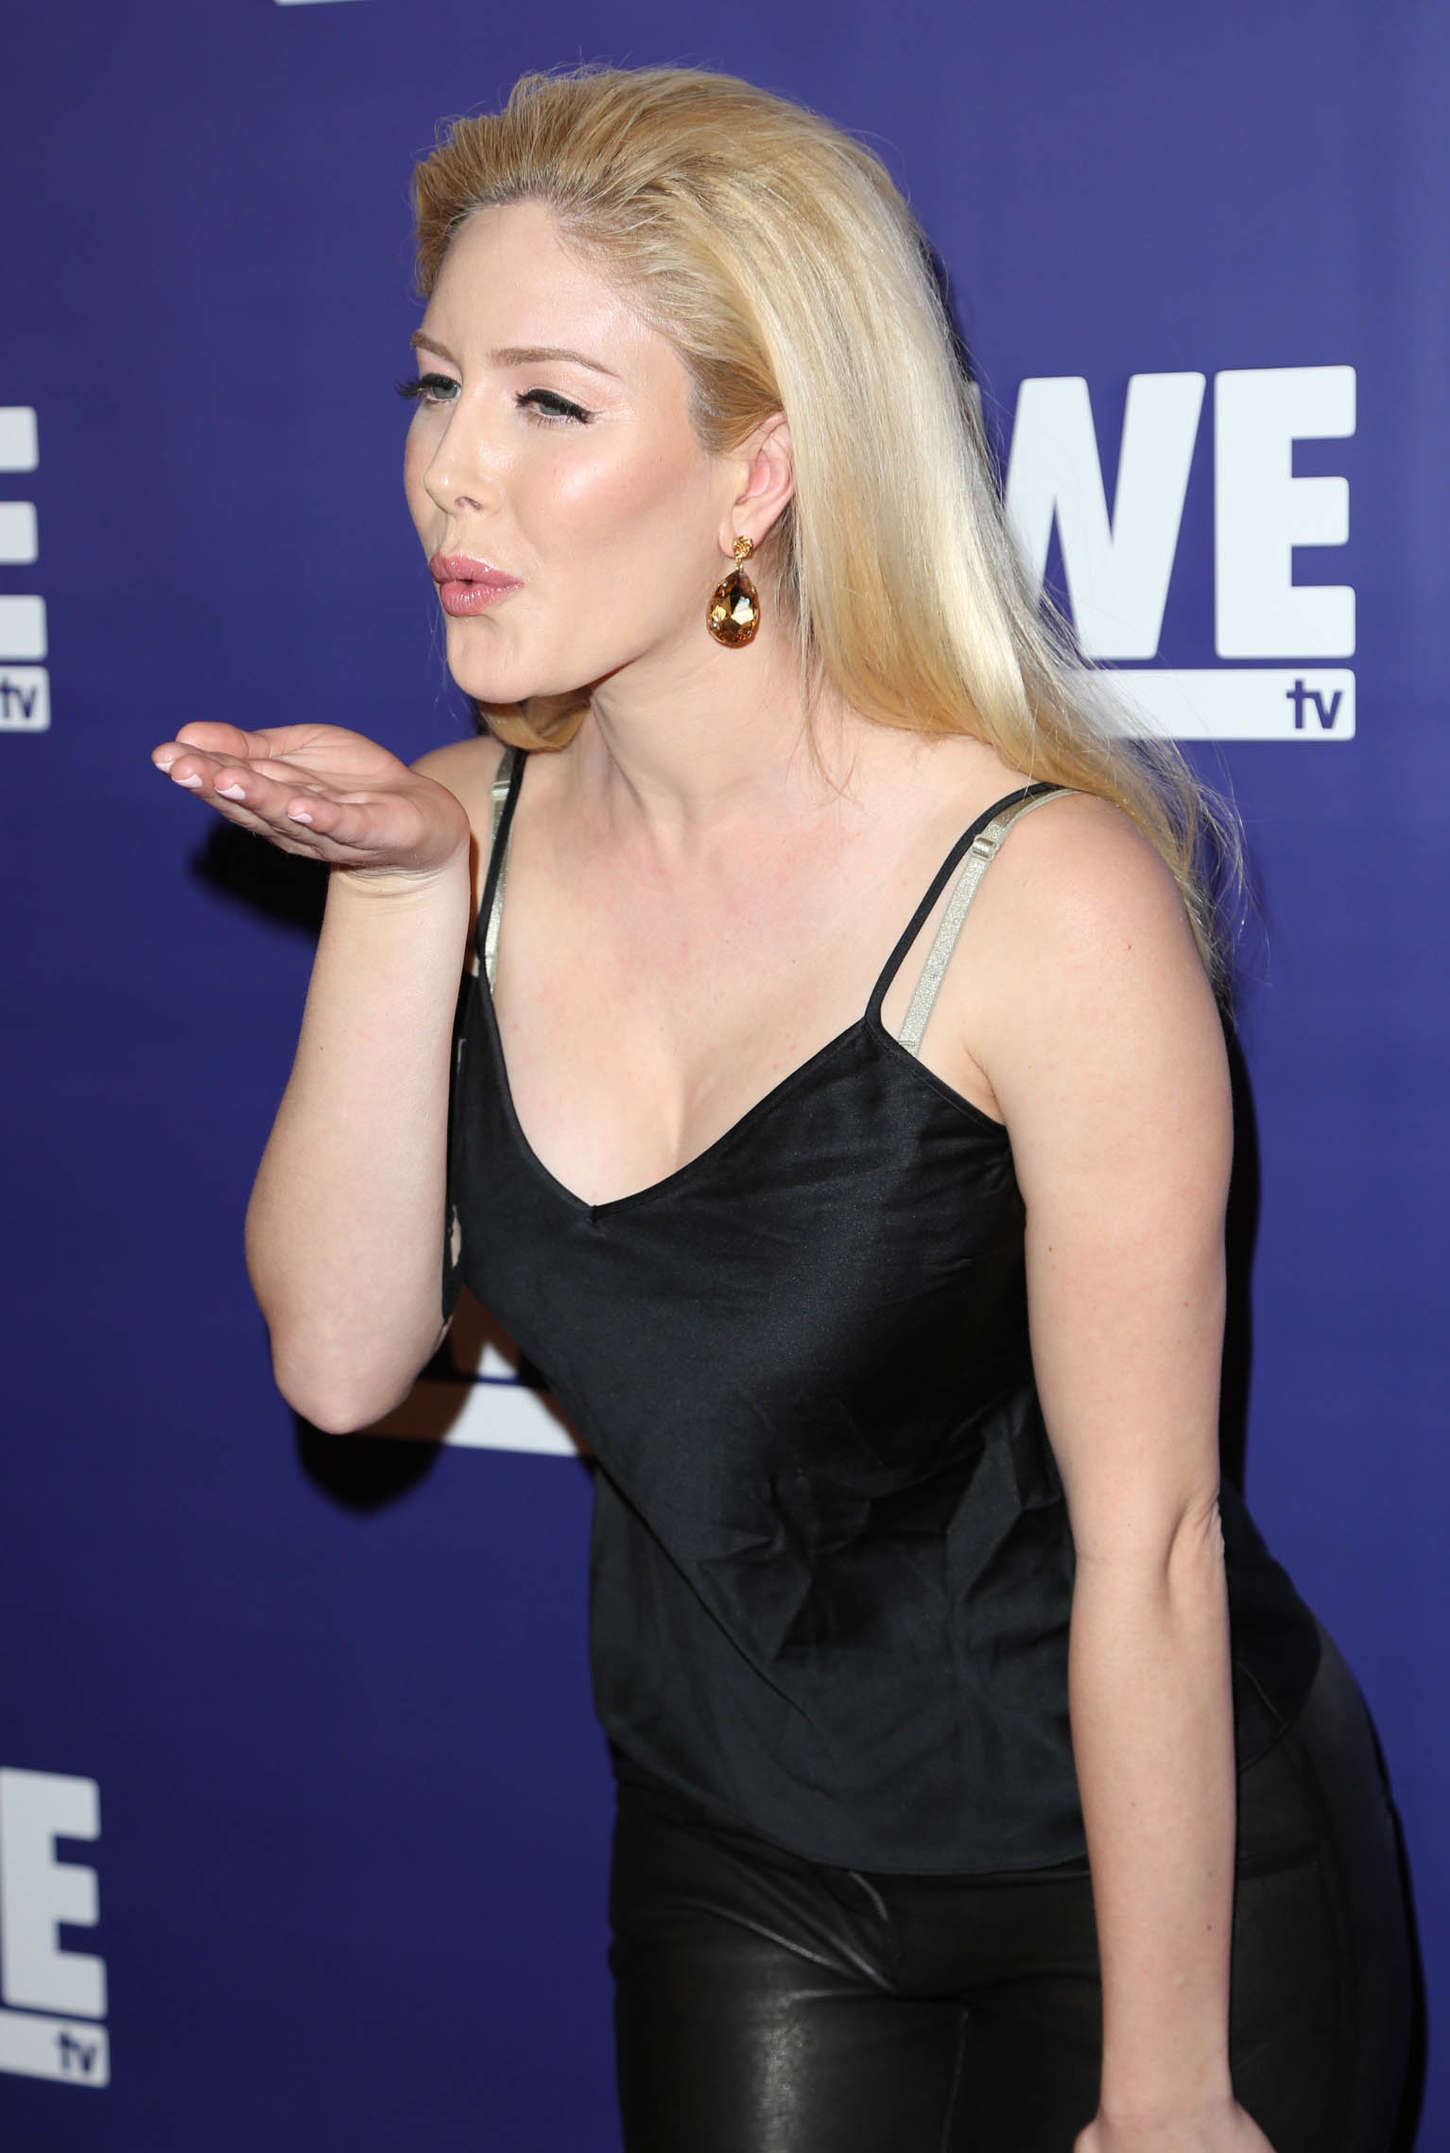 Heidi Montag - We tv "The Evolution of Relationship Reality Show" in LA